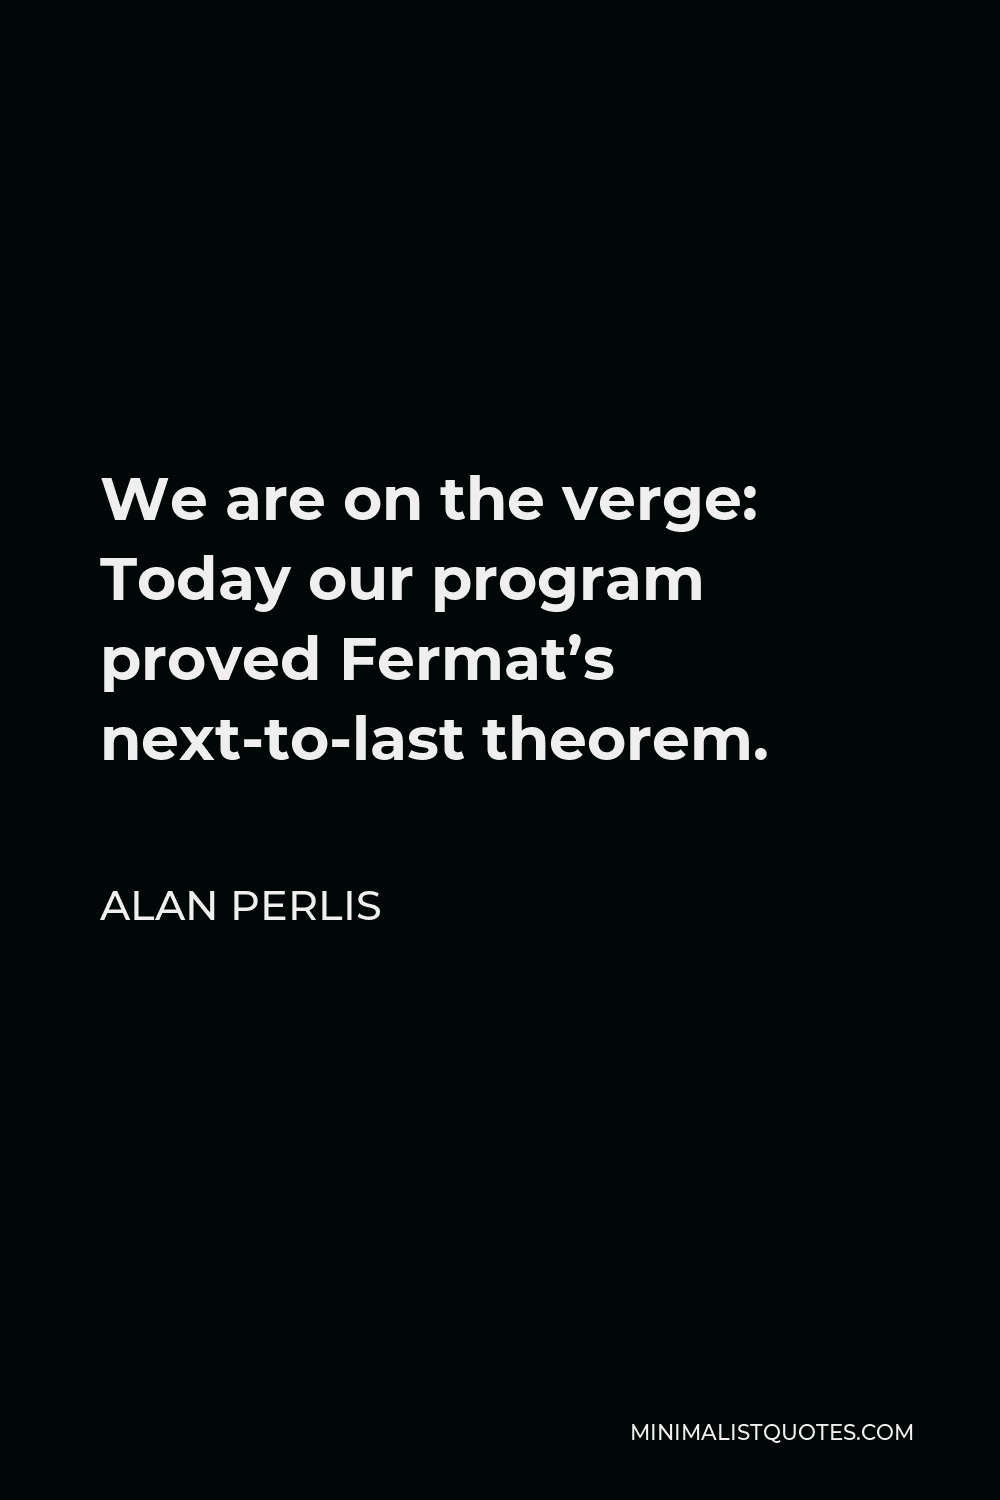 Alan Perlis Quote - We are on the verge: Today our program proved Fermat’s next-to-last theorem.